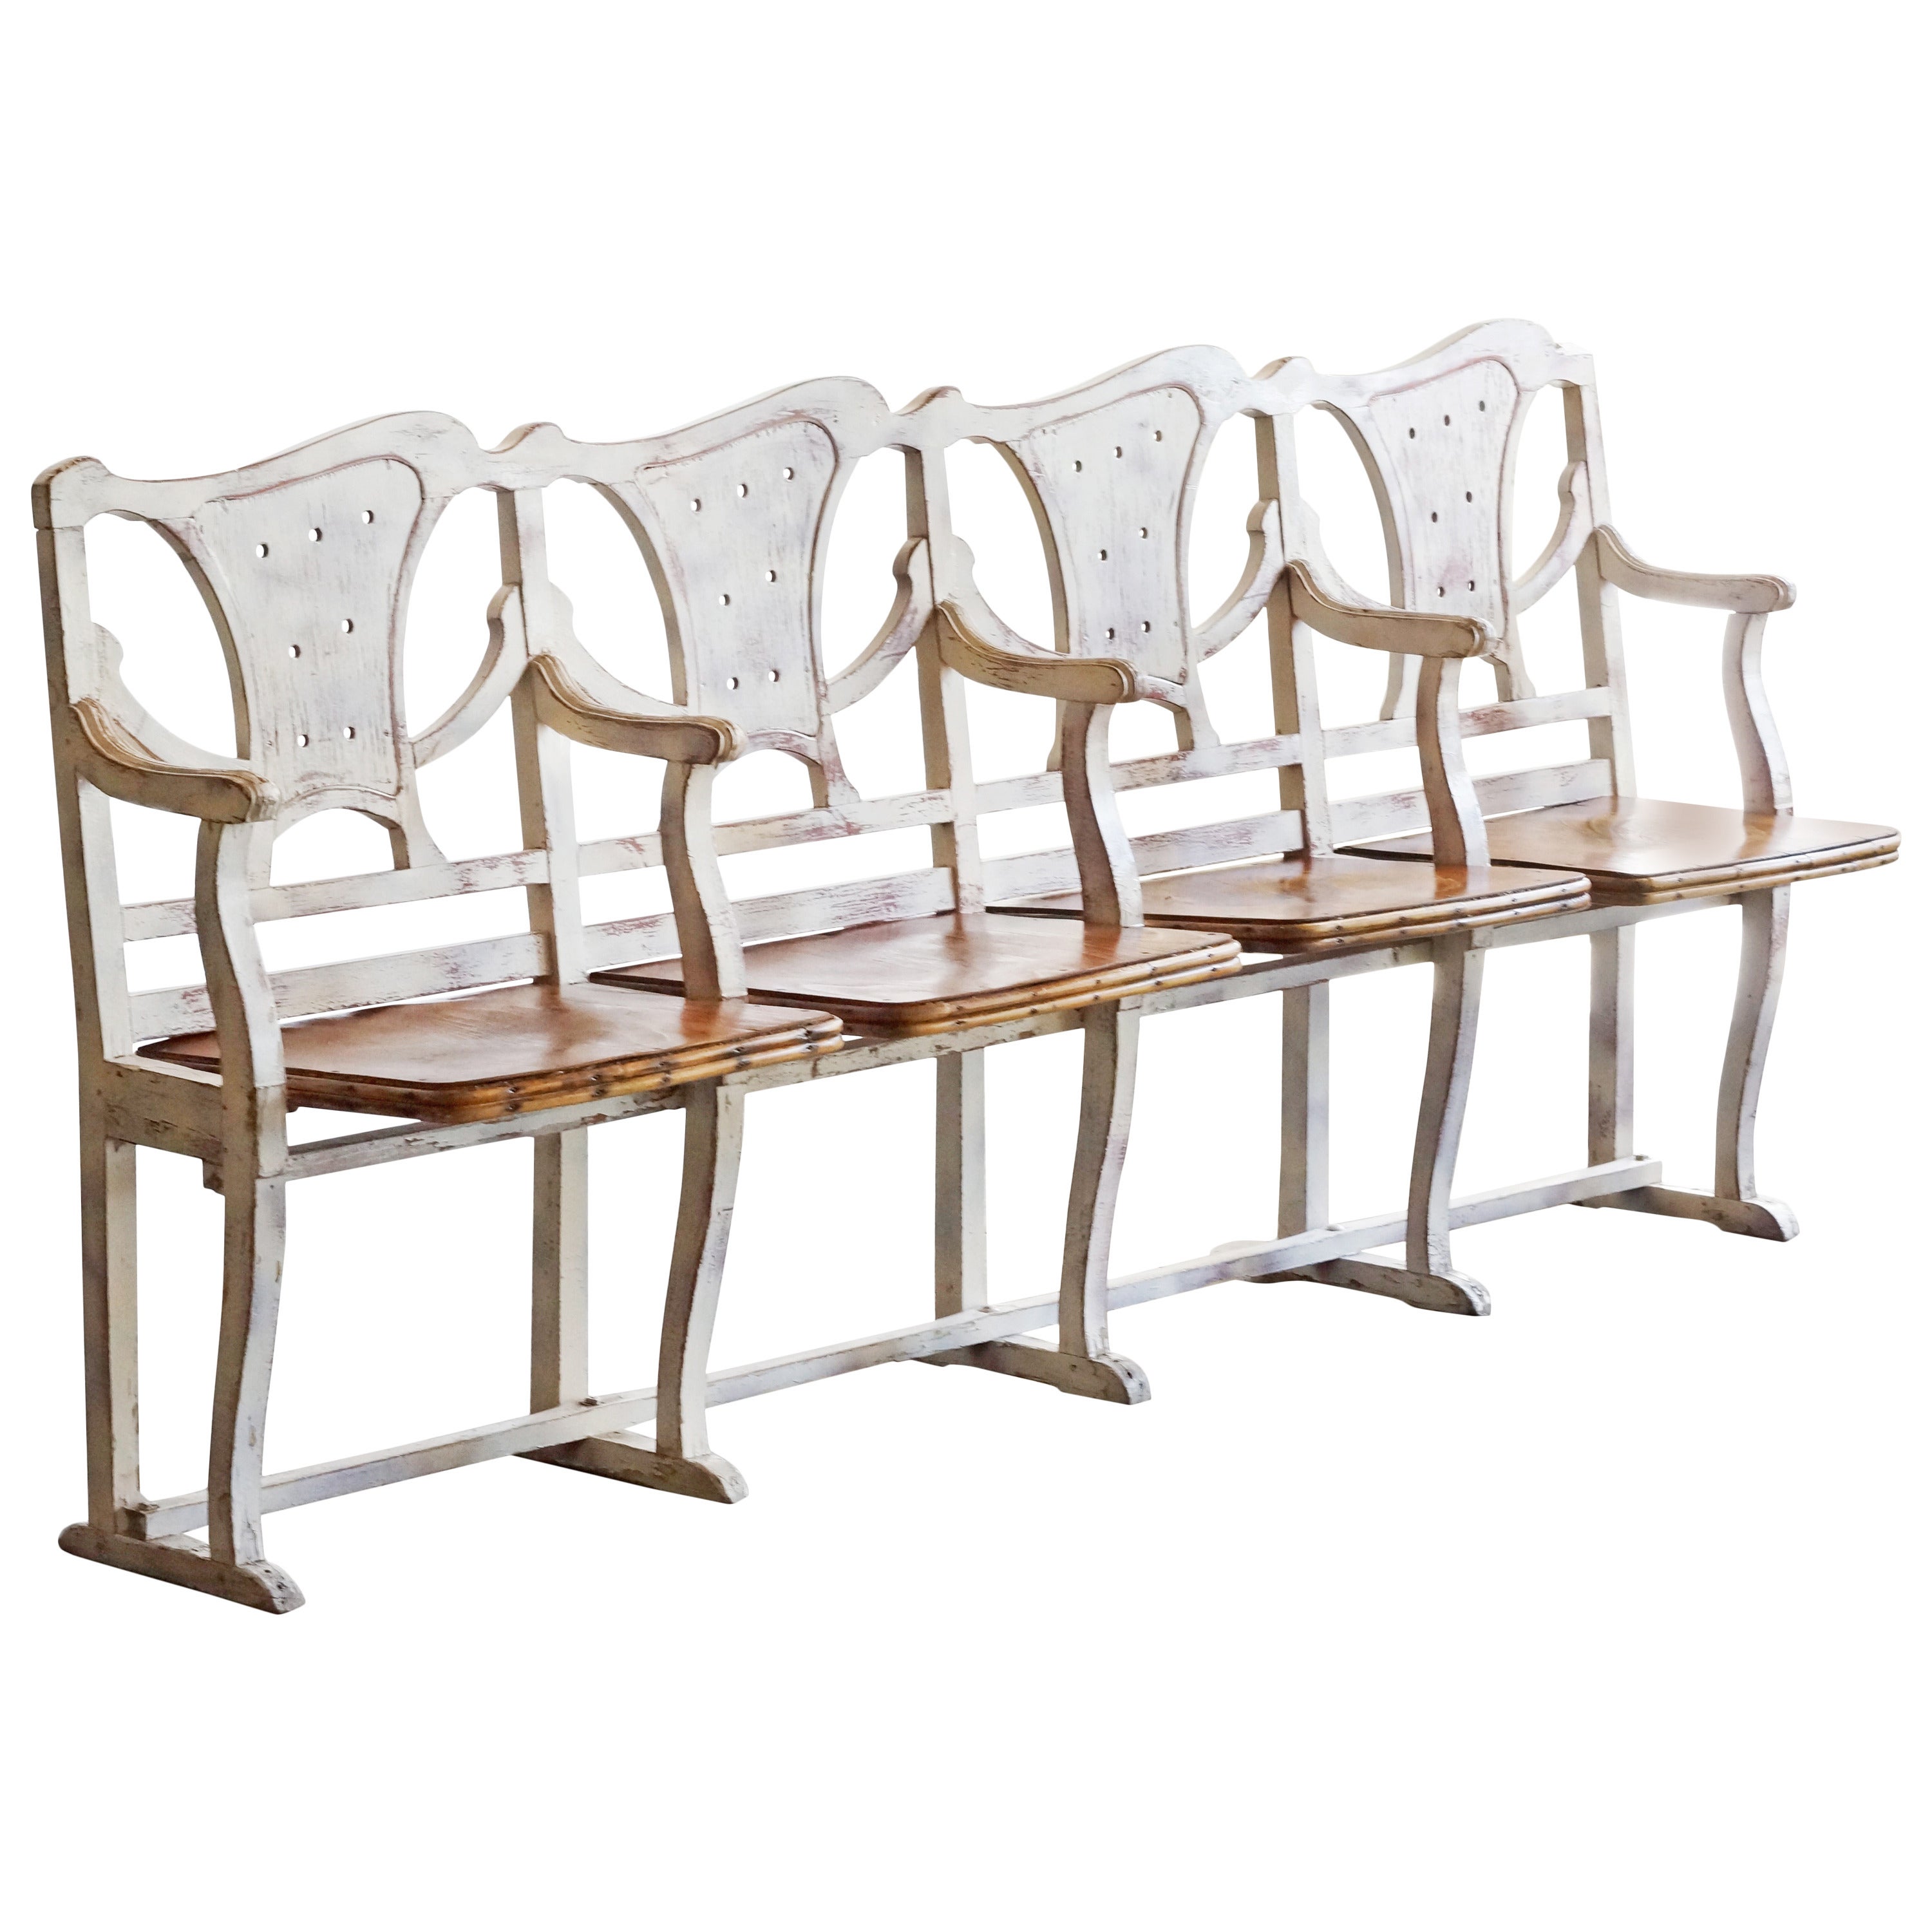 Antique Cottage-Style Row of Theater Seats with Crest Design